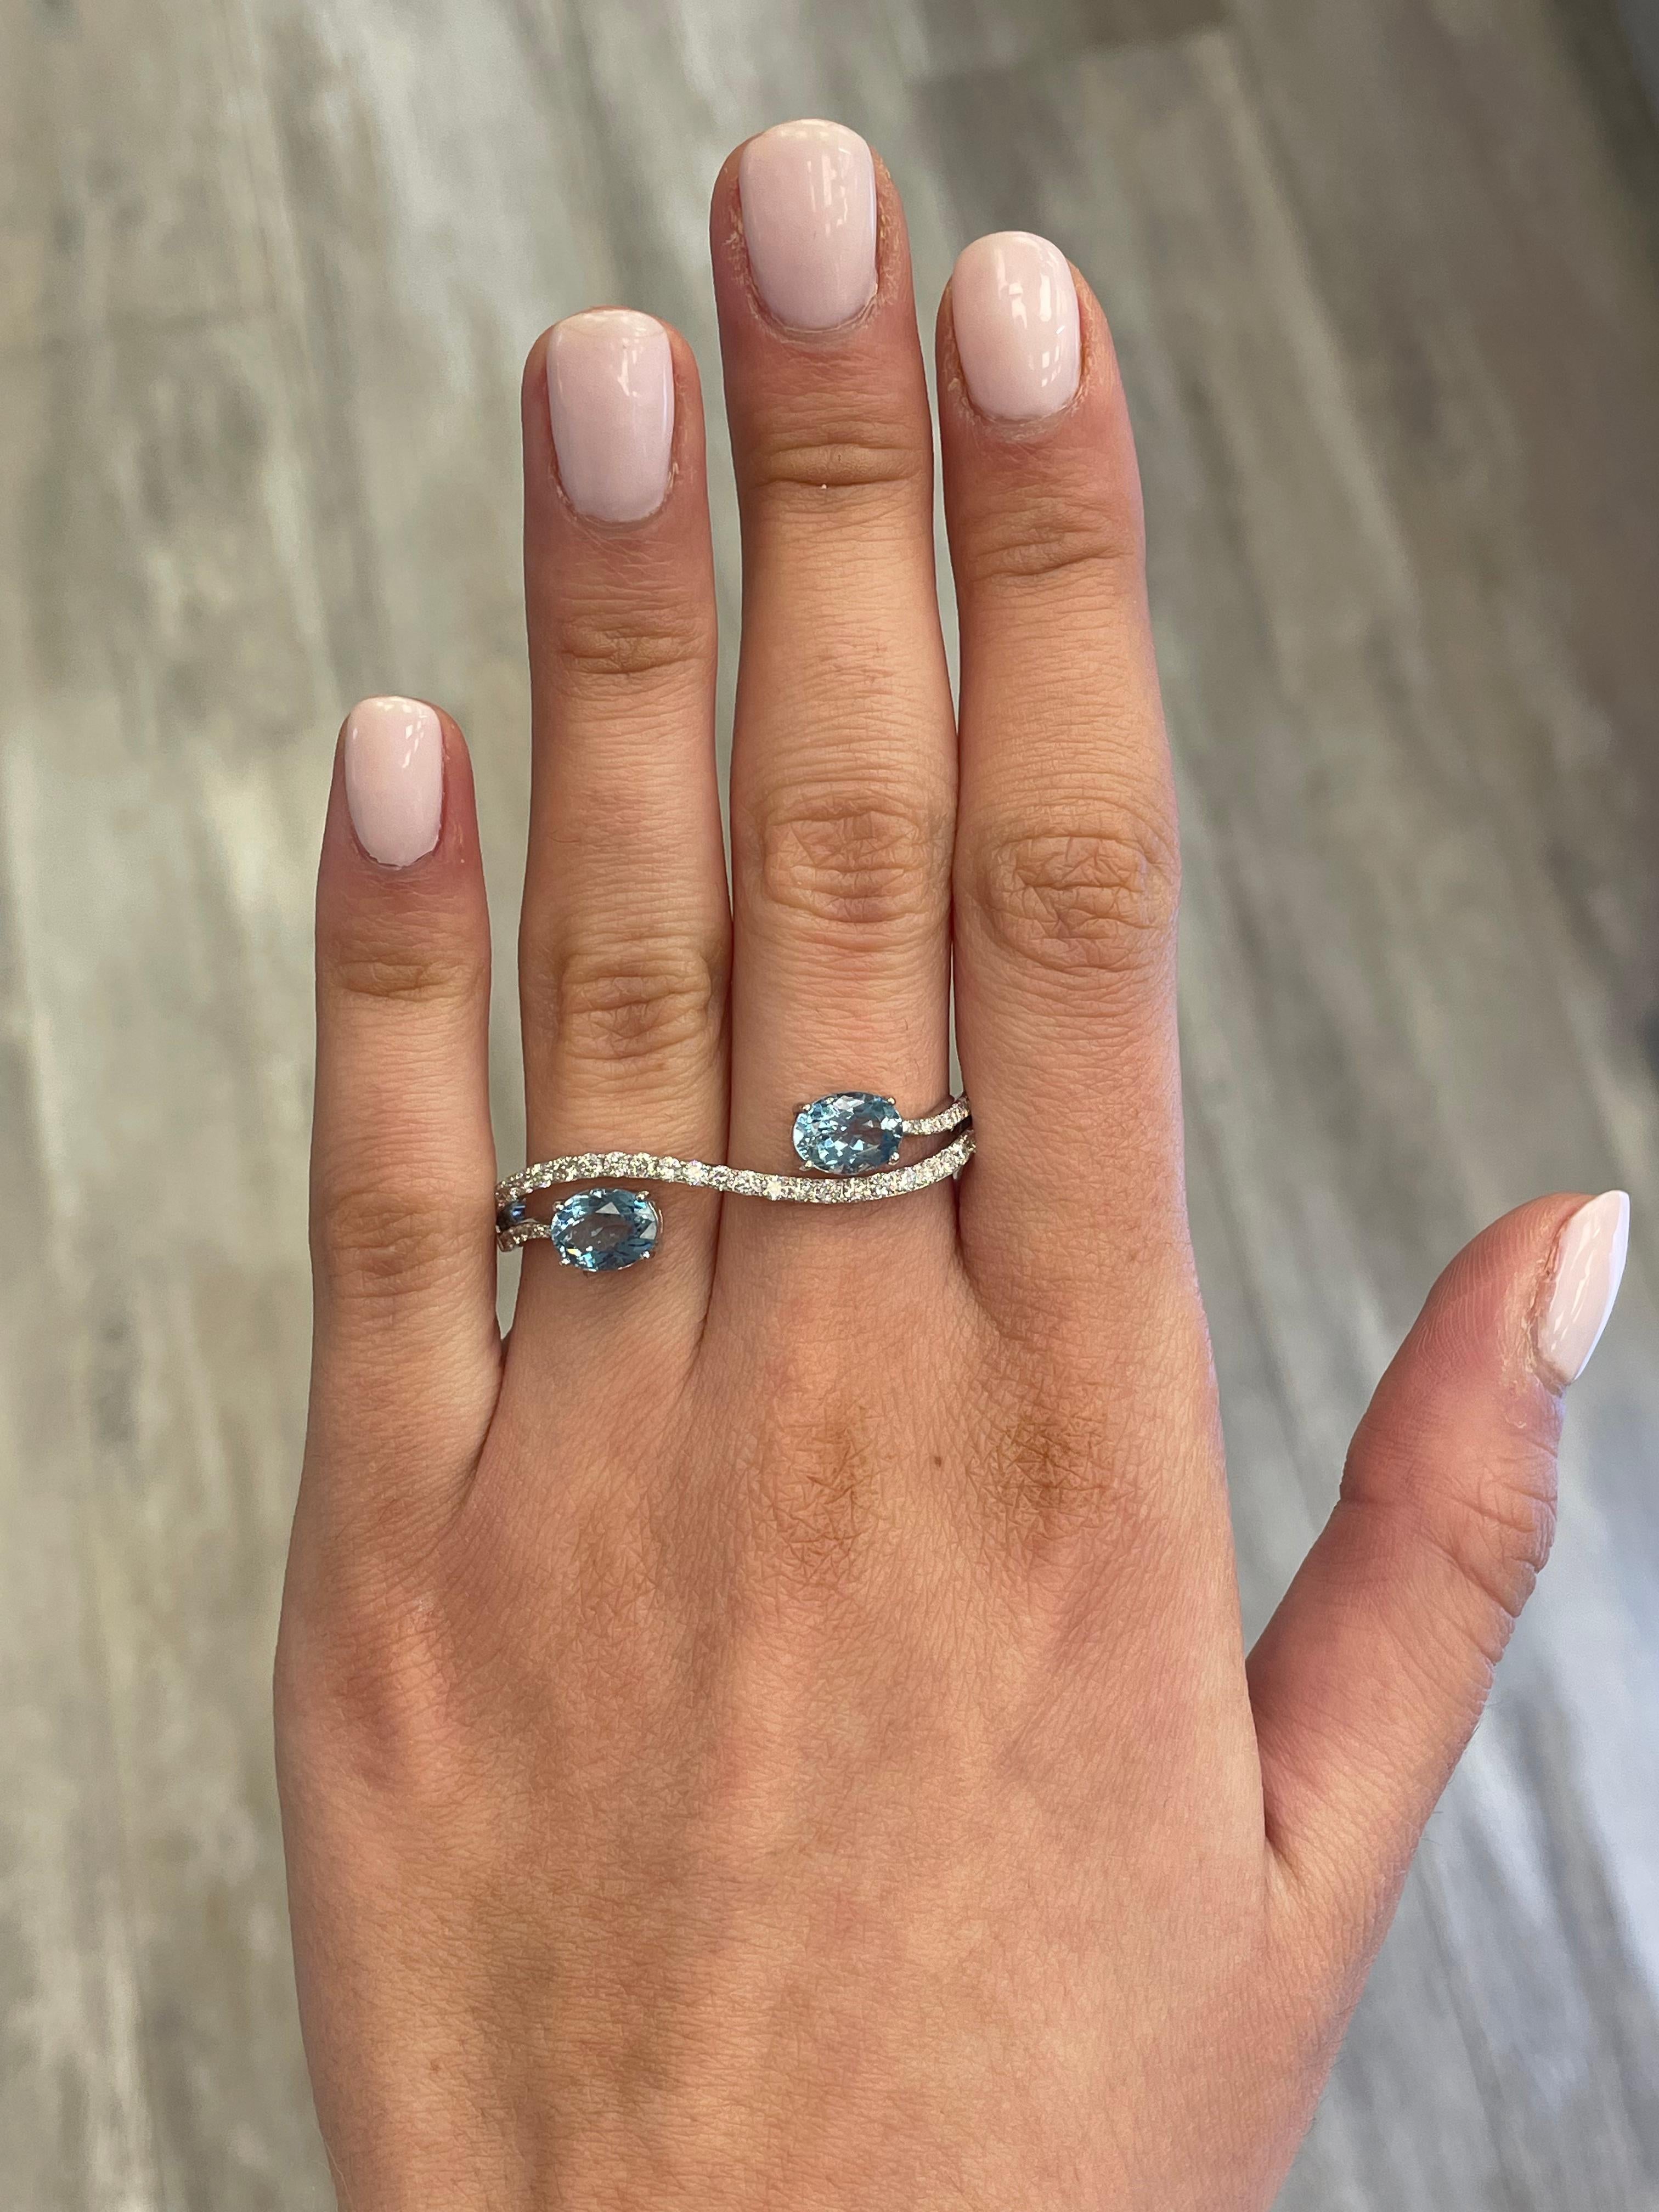 Stunning aquamarine and diamond double ring, by Alexander Beverly Hills.
2 oval aquamarines, 2.20 carats. Complimented by 37 round brilliant diamonds, 0.67 carats. Approximately D-F color and SI clarity. 18-karat white gold, 5.53 grams, 6.5 & 6.75